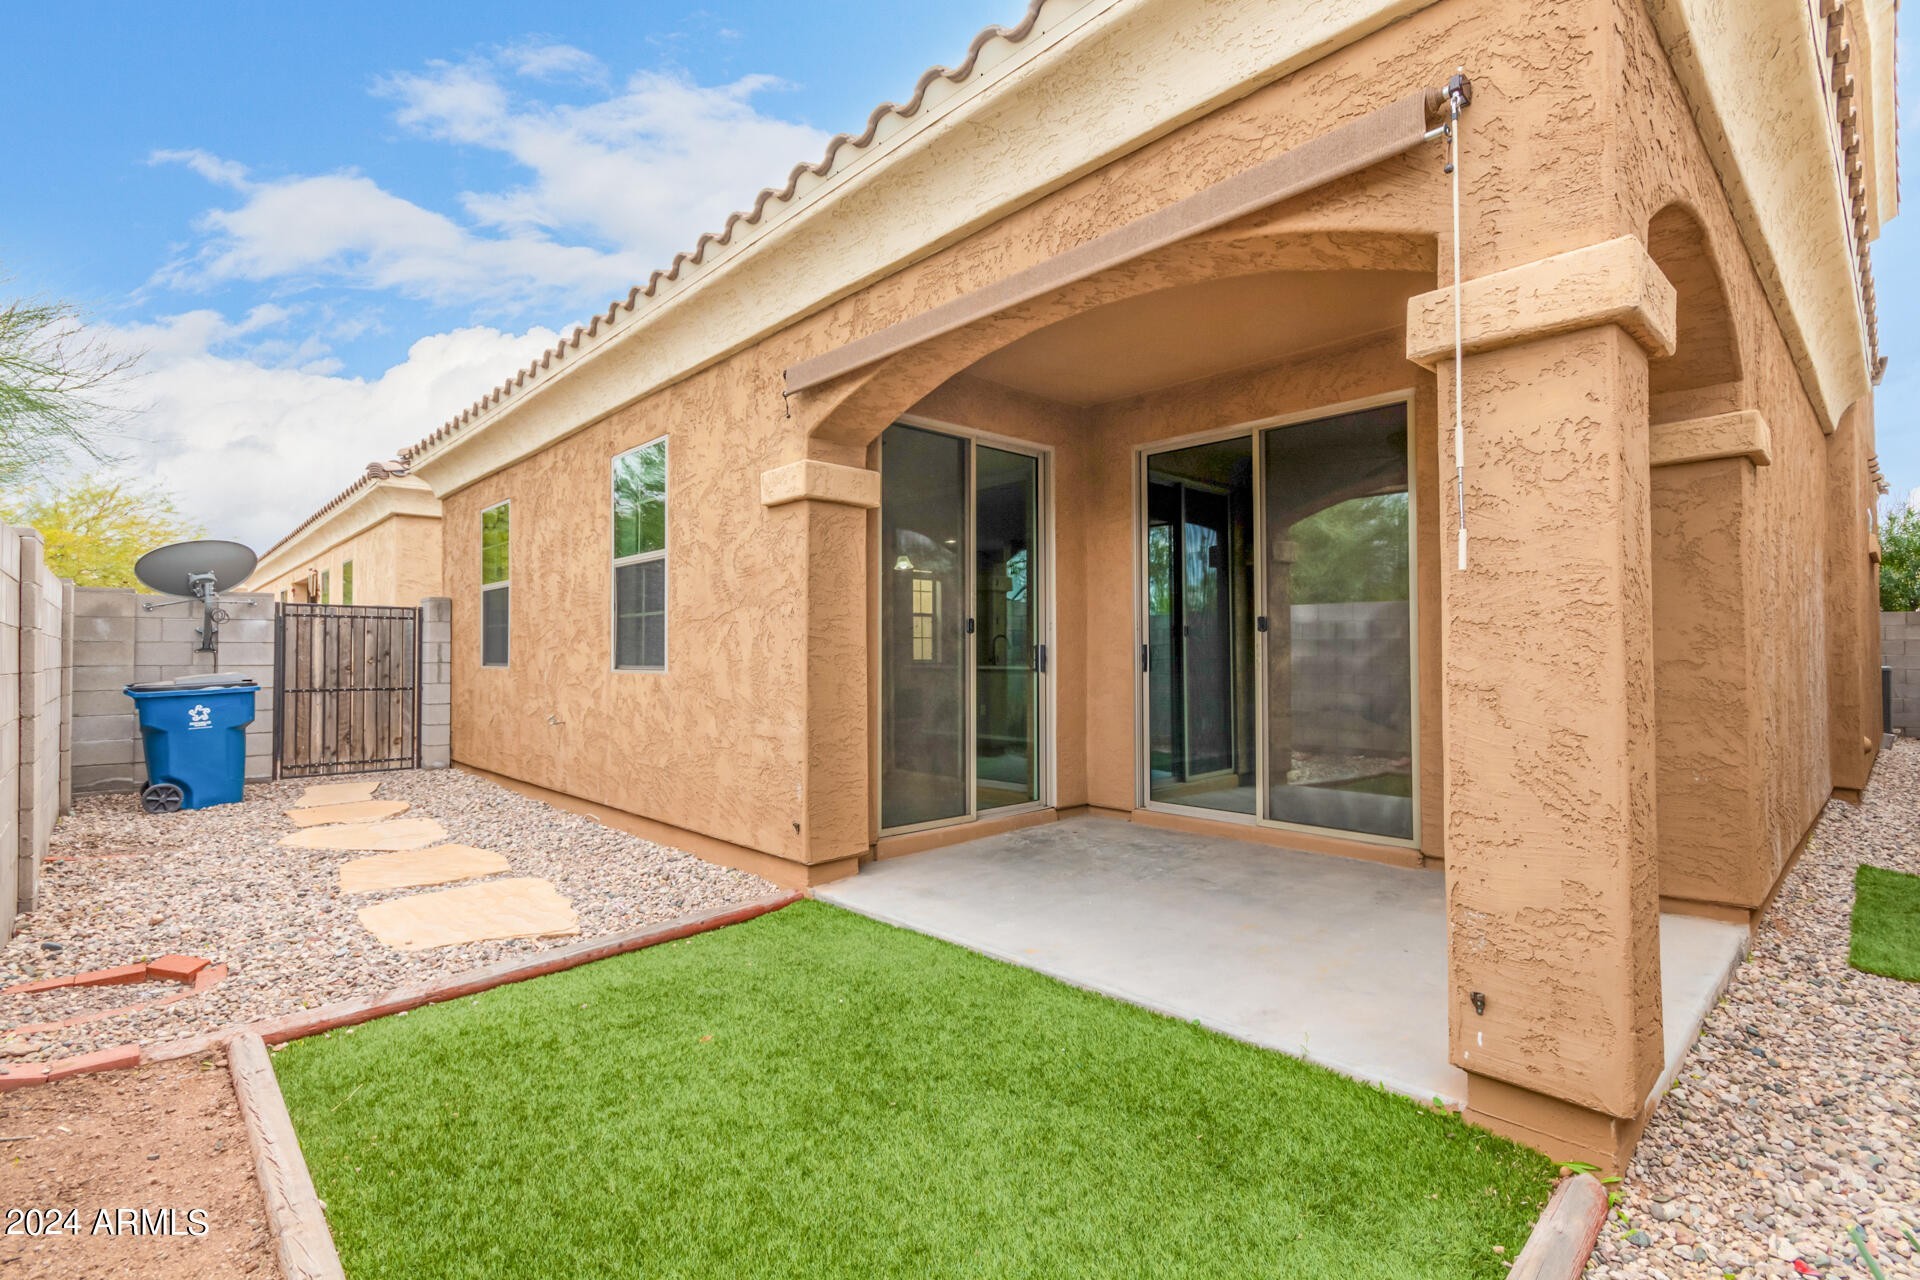 41. 1683 S Desert View Place